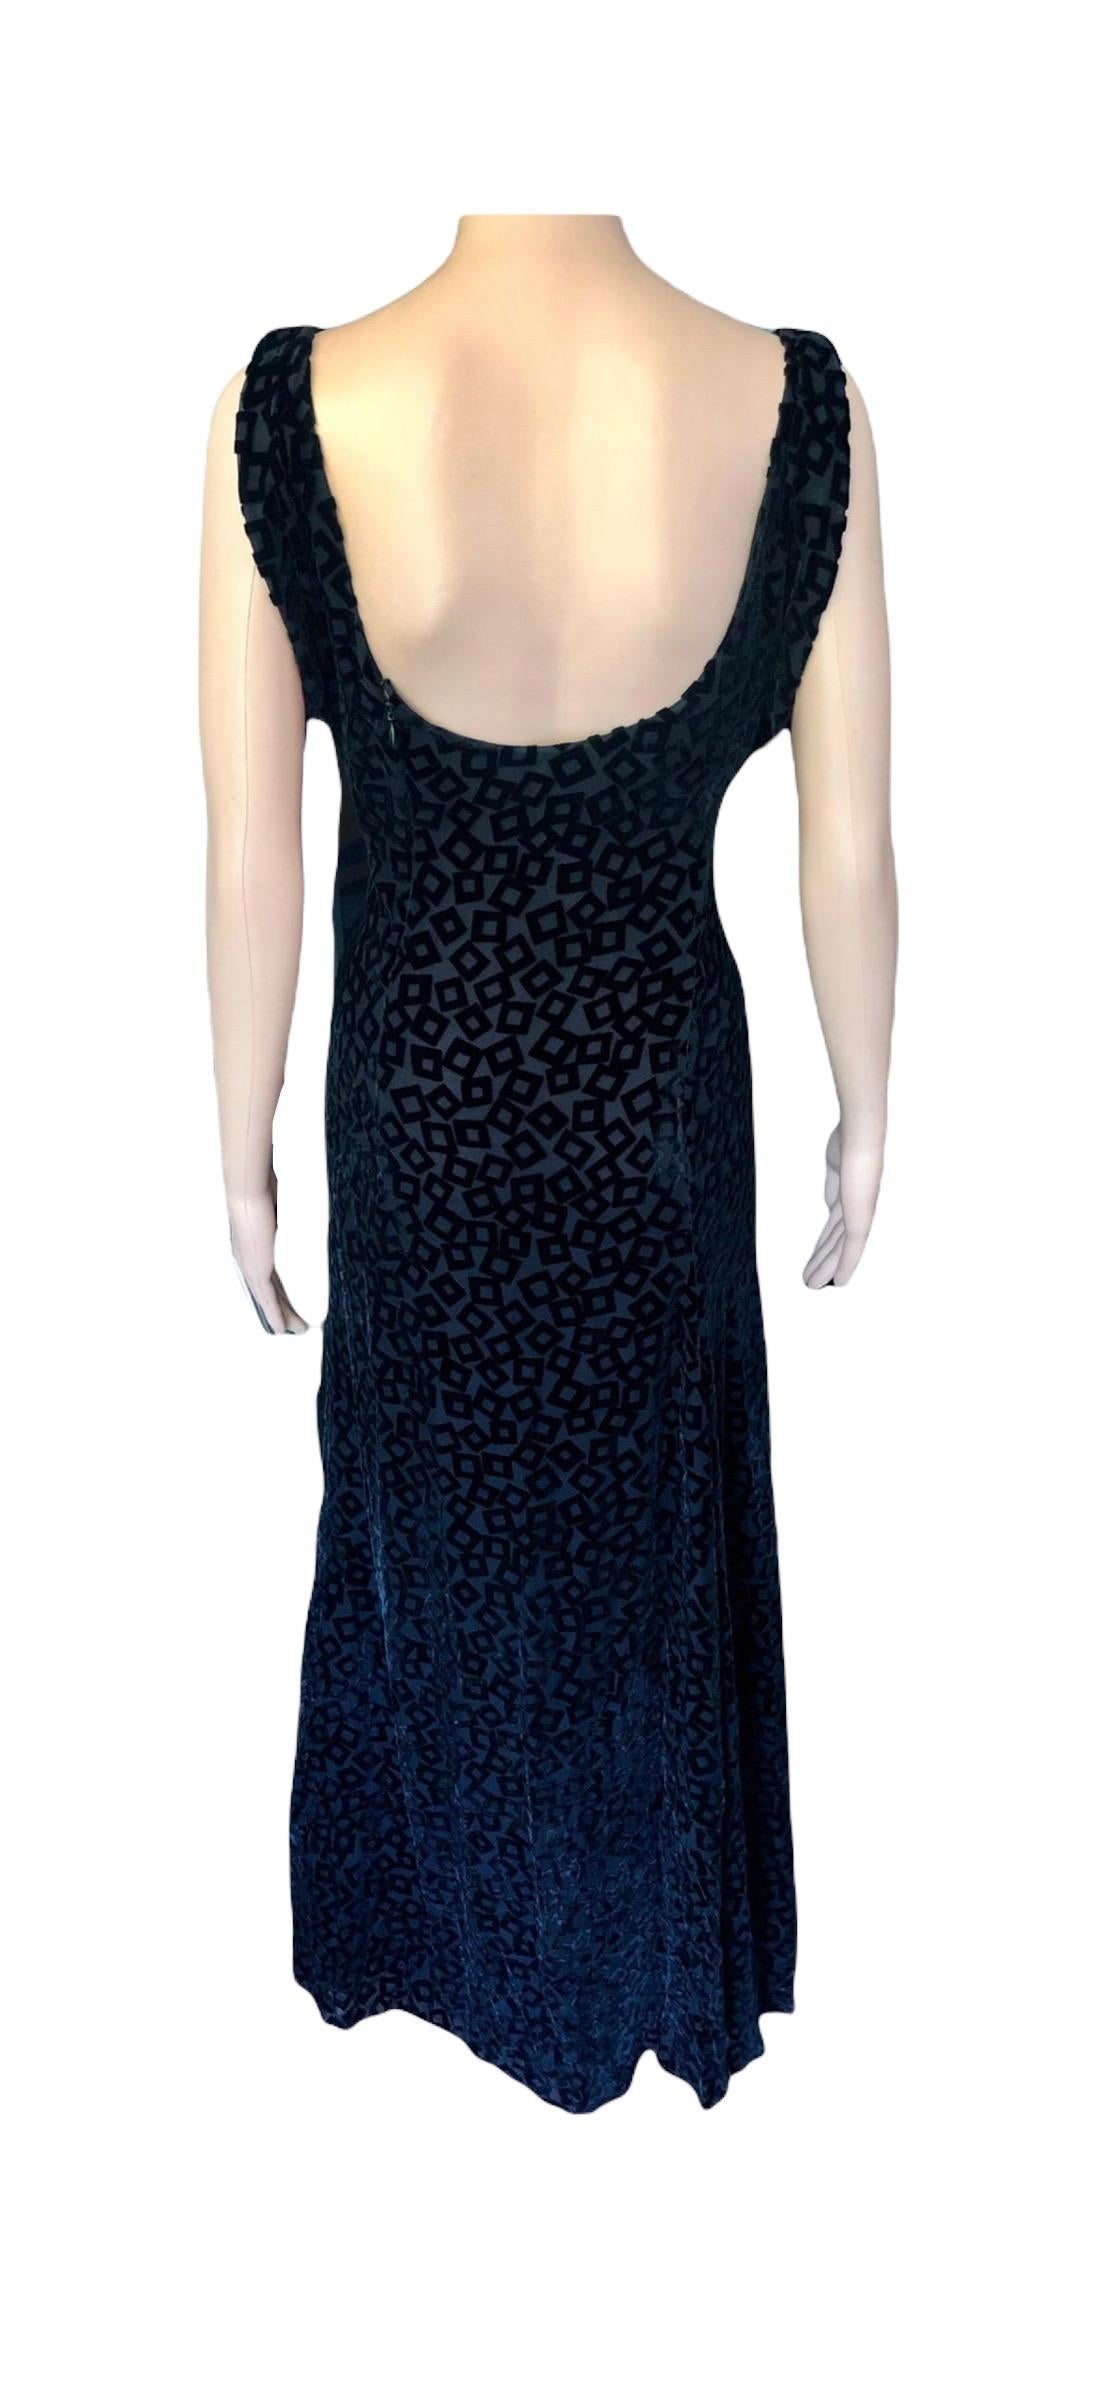 Gianni Versace S/S 1999 Vintage Black Evening Dress Gown For Sale 6